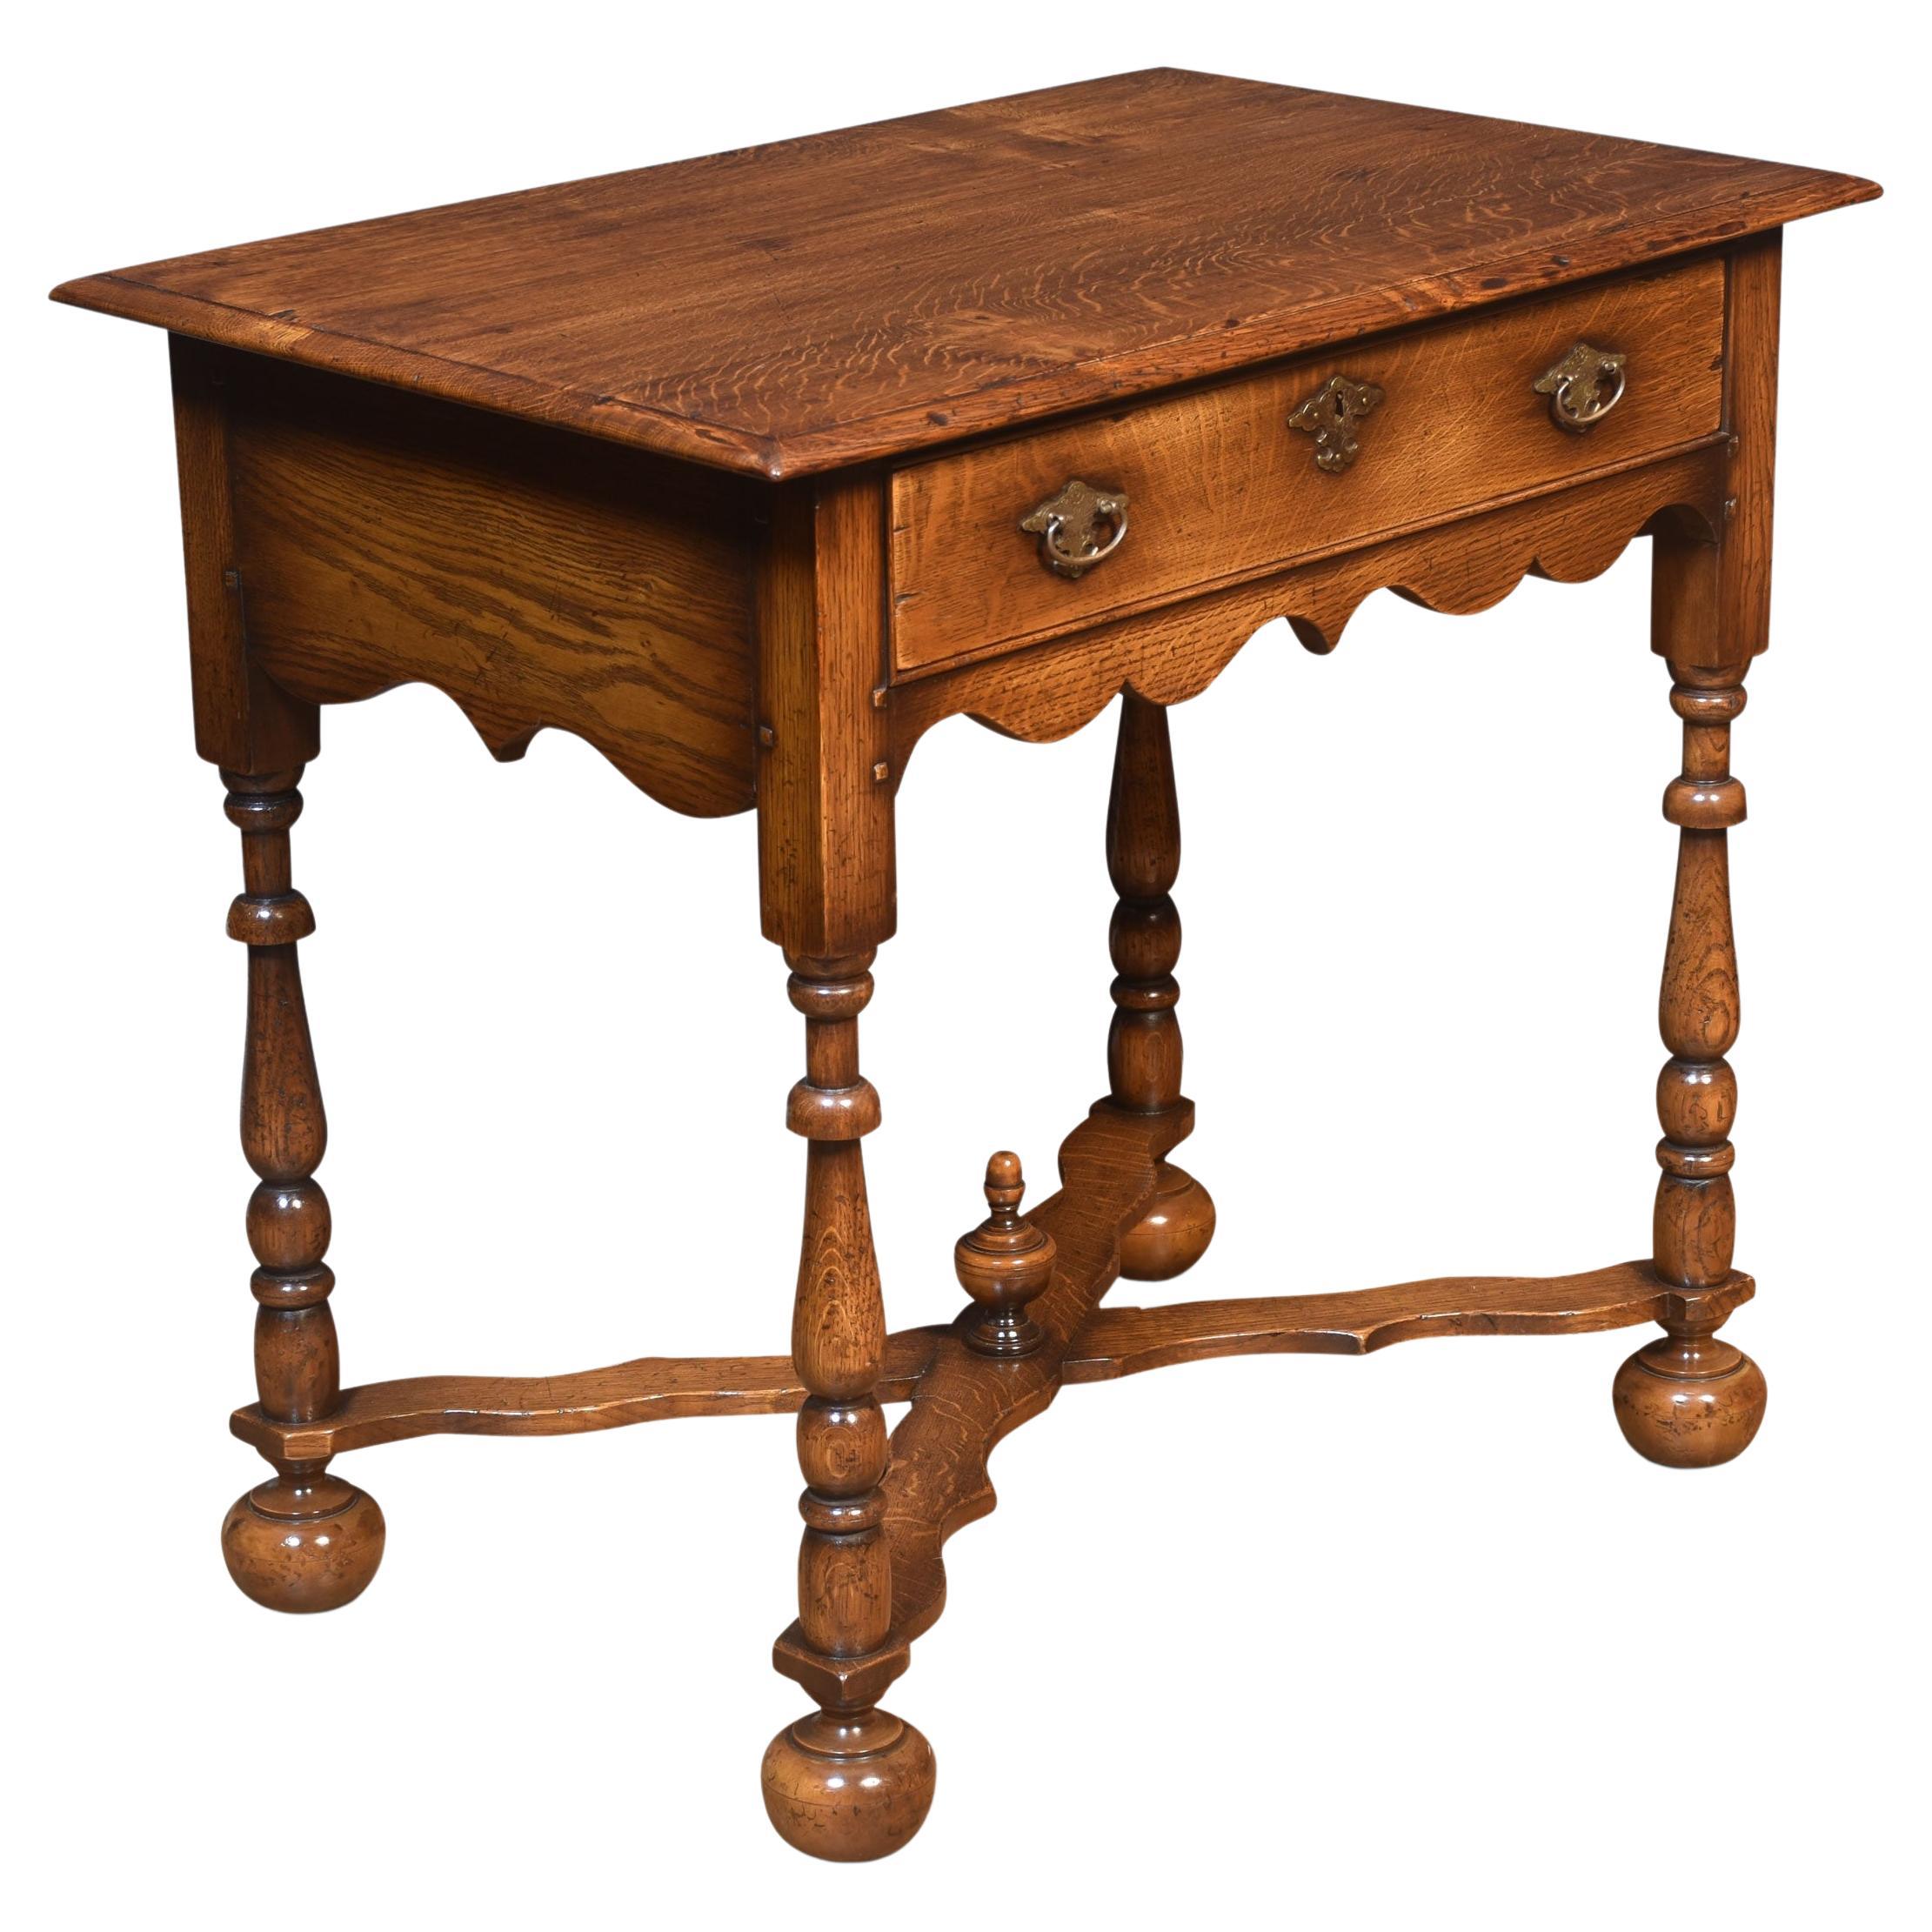 17th century style oak side table For Sale at 1stDibs